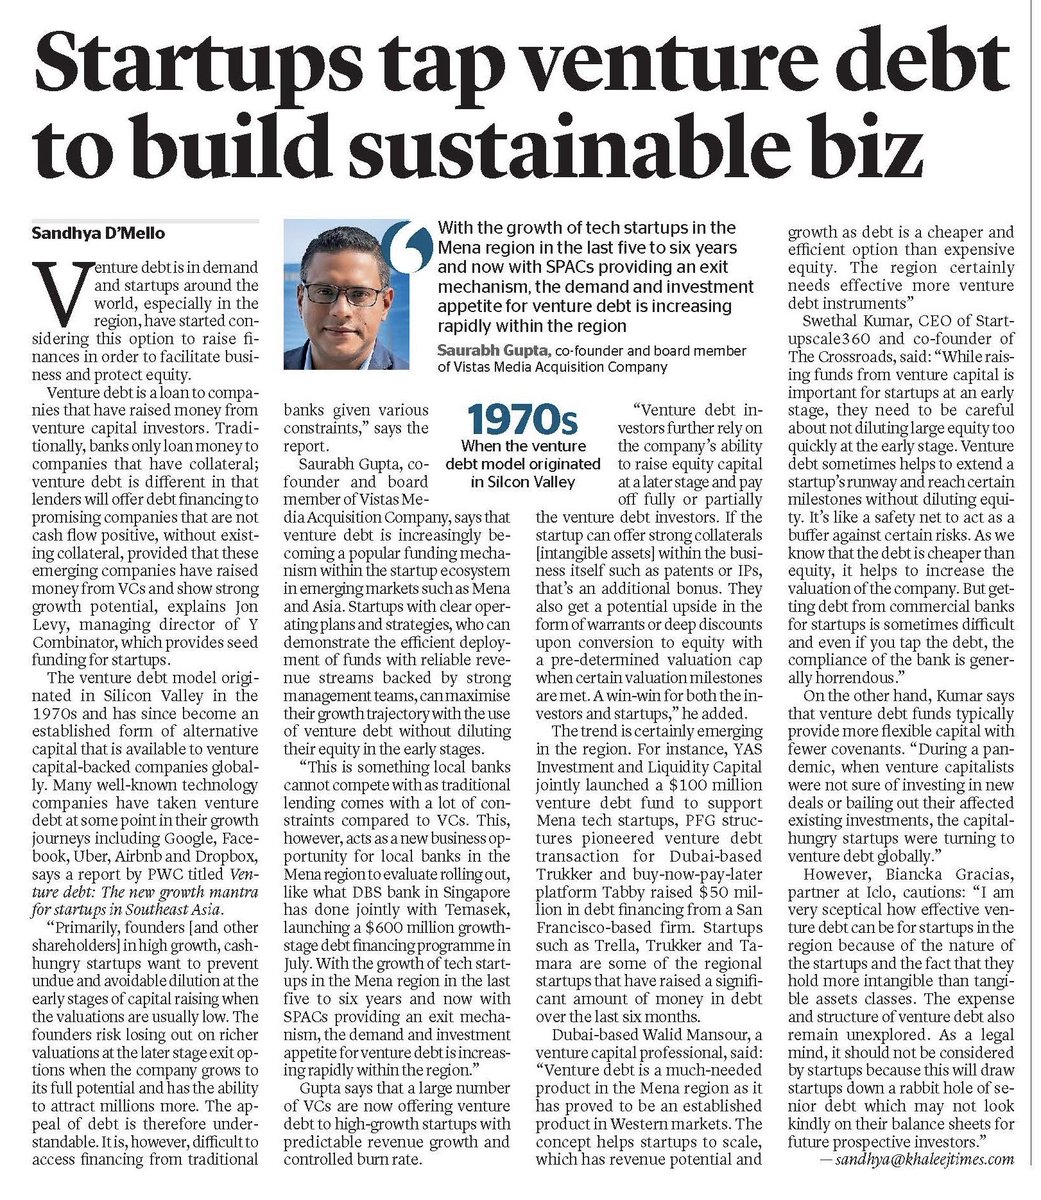 Today in @khaleejtimes (Business Section) #uae , I share my views about the growth in Venture Debt across #menaregion and #asia supporting the #startup ecosystem. khaleejtimes.com/business/start…